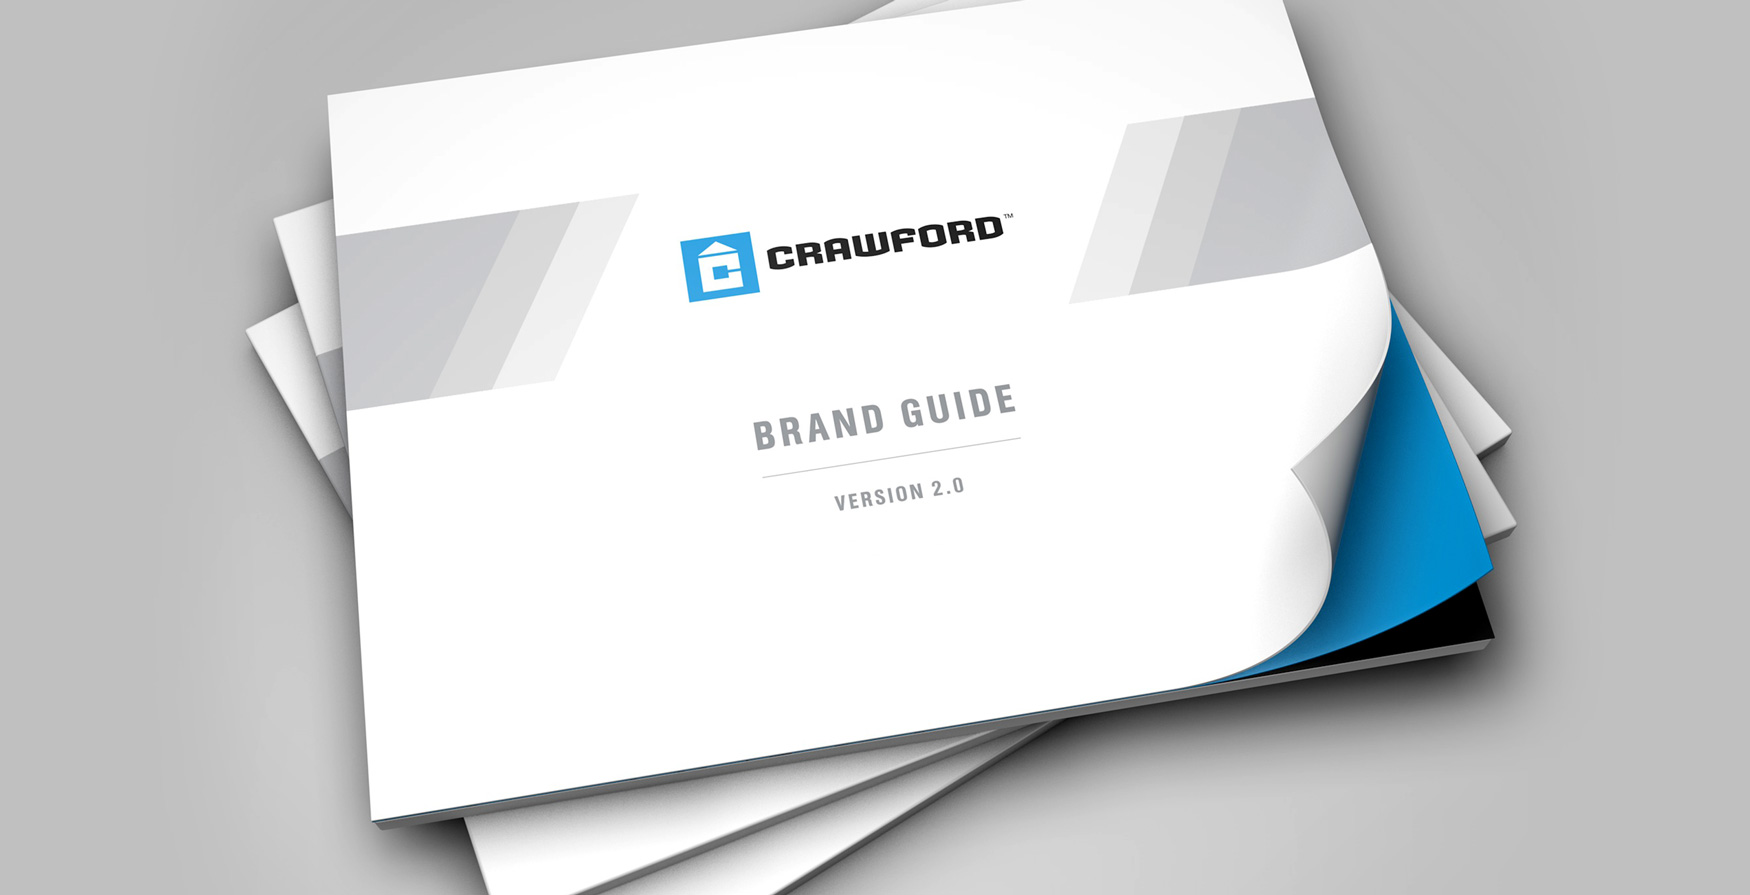 crawford-brand-guide-book-design-page-layout-branding-clean-hardware-industrial-graphic-design-guidelines